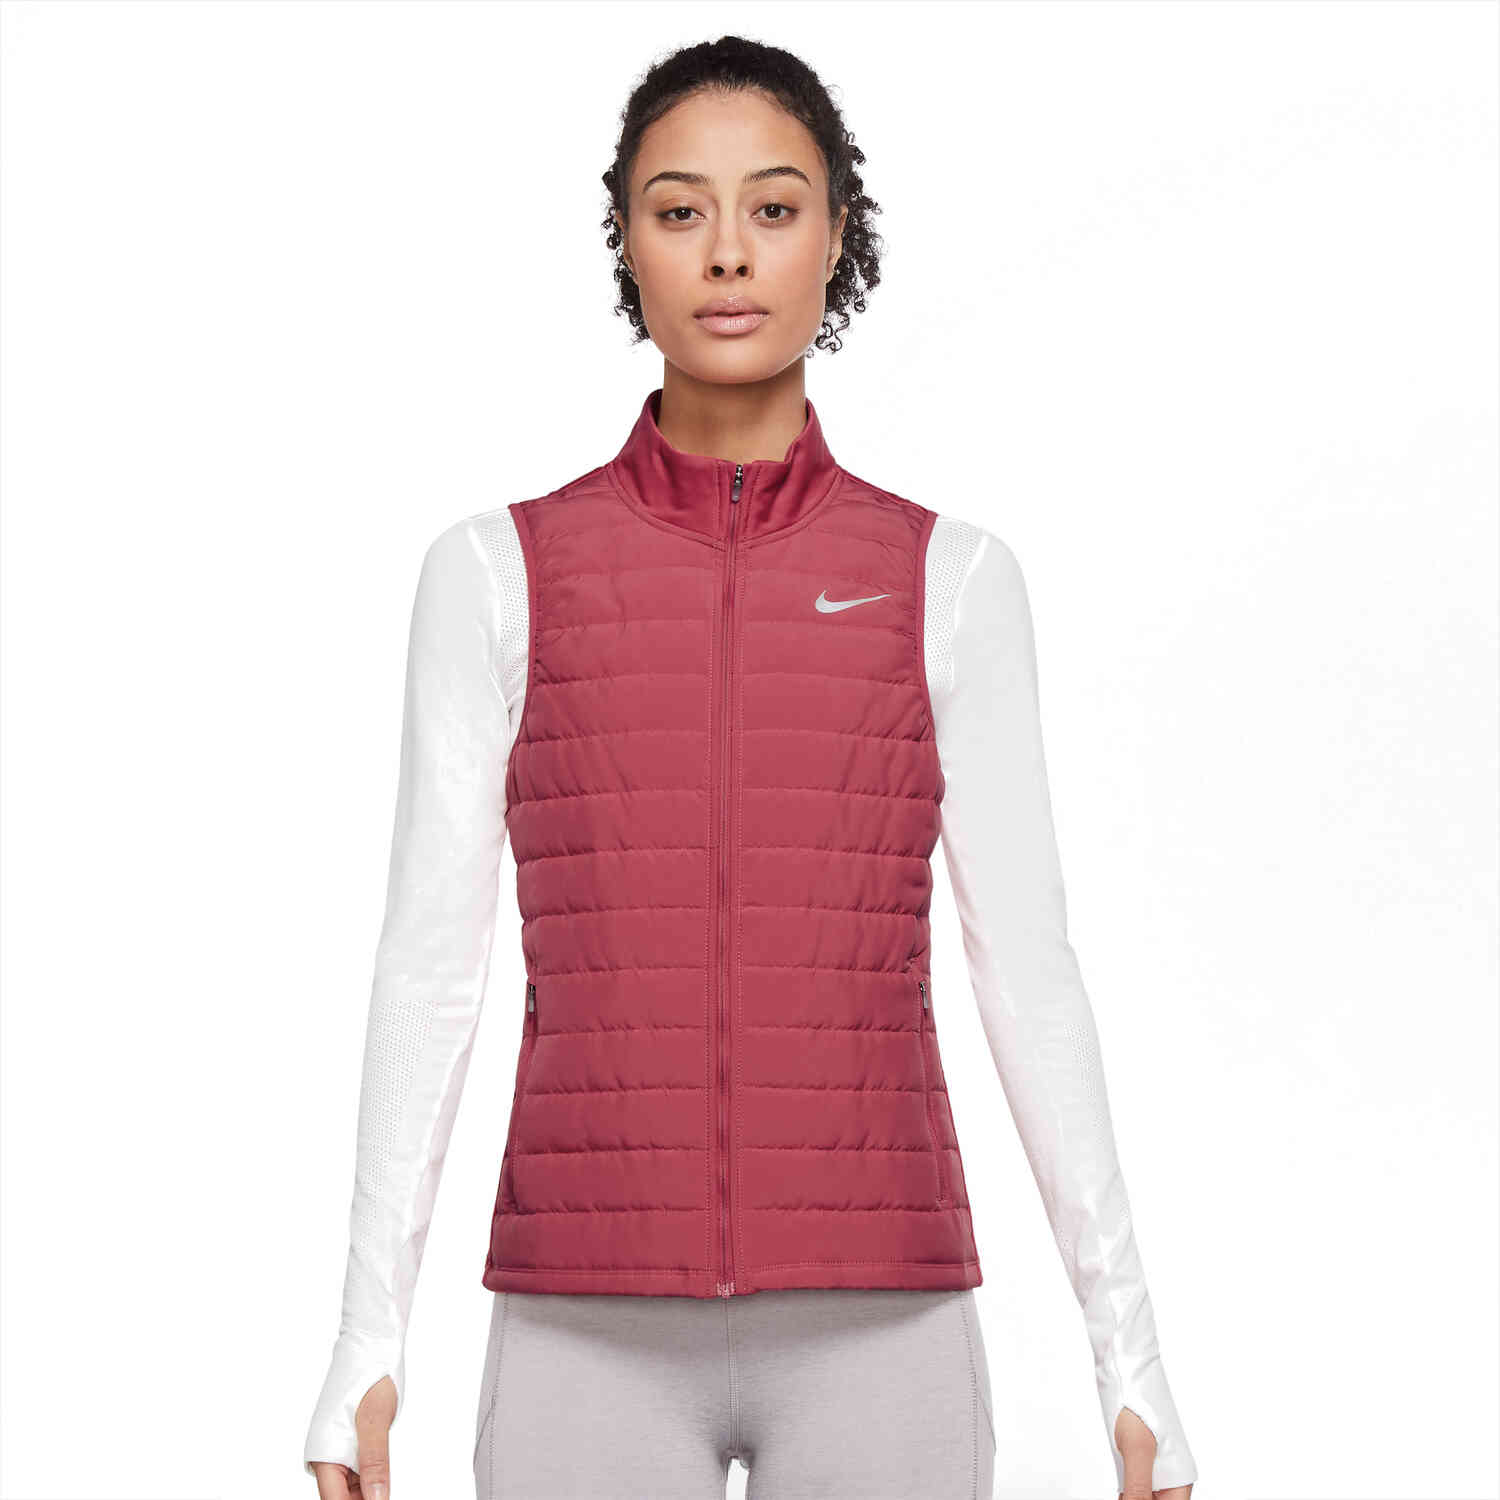 brud Avl Mig Womens Nike Therma-Fit Filled Vest - Archaeo Pink/Reflective Silv -  SoccerPro